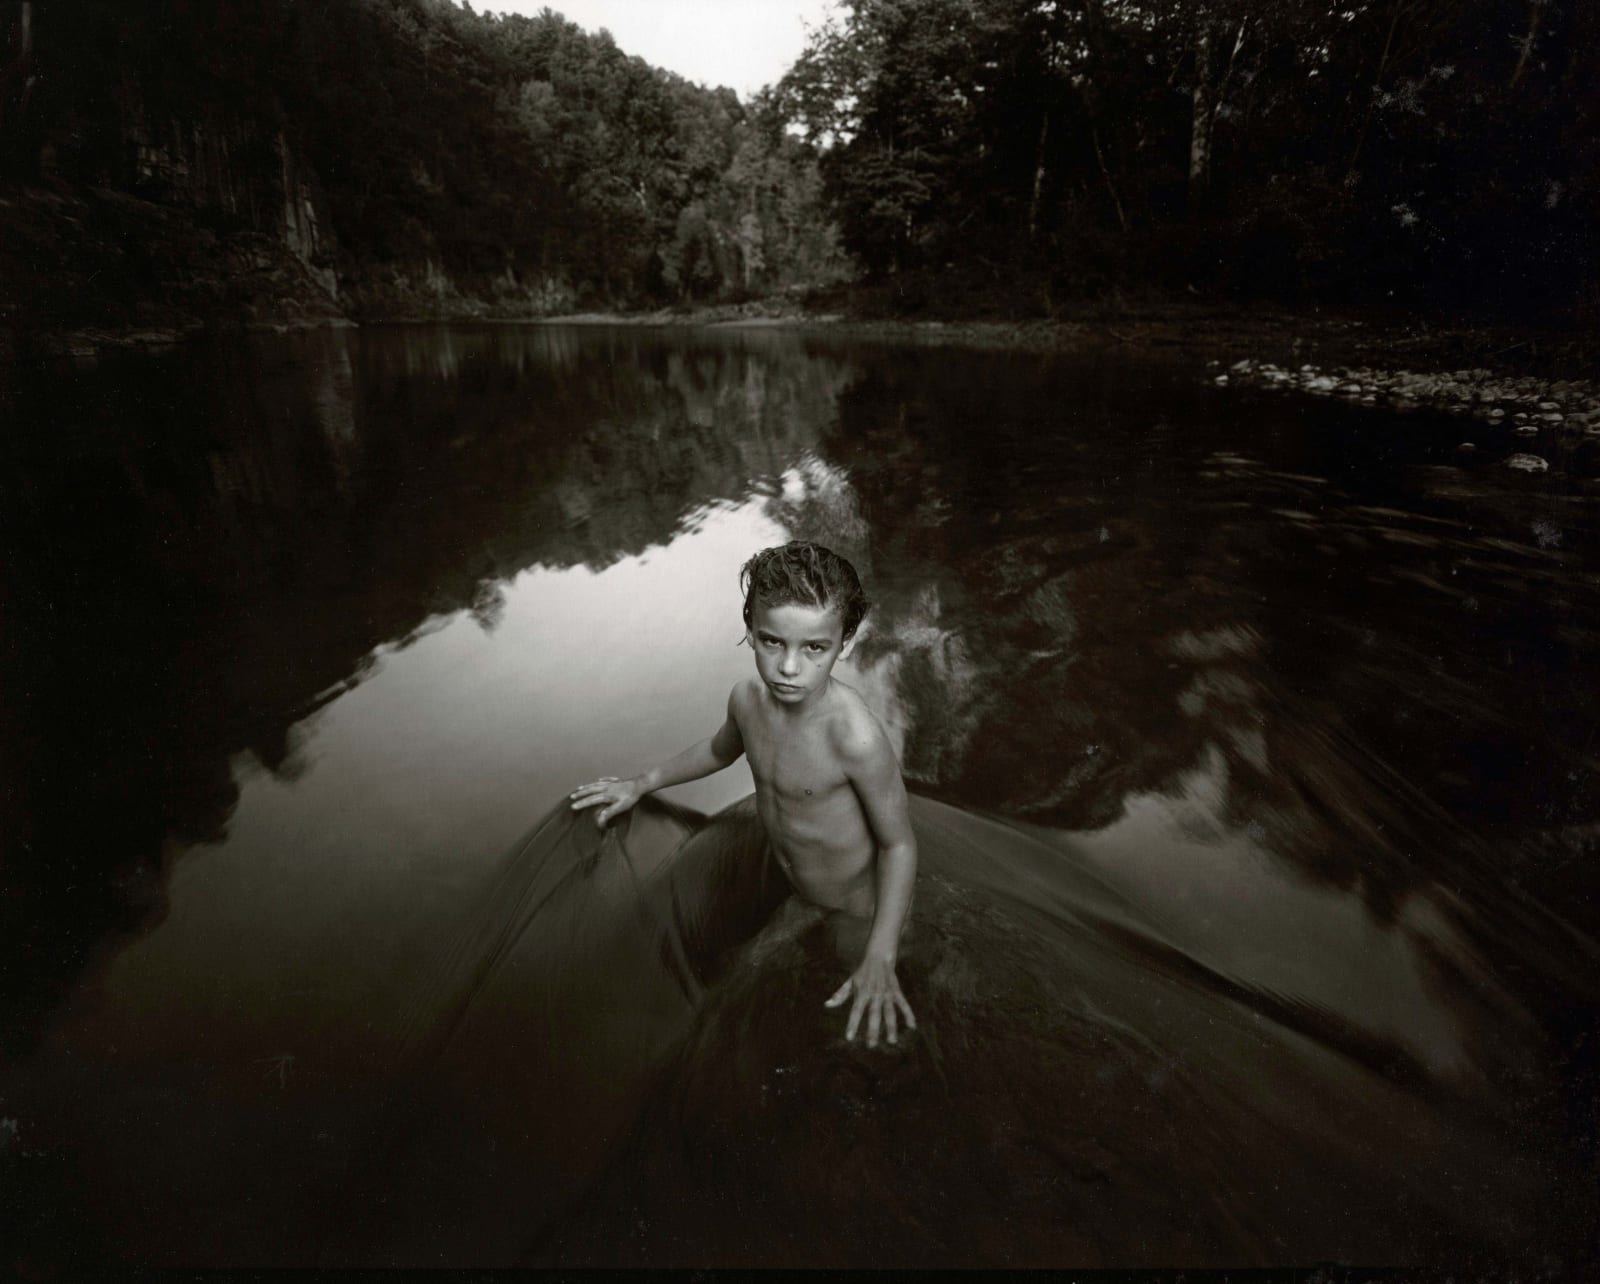 Sally Mann Immediate Family series, The Last Time Emmett Modeled Nude, photograph of son in water